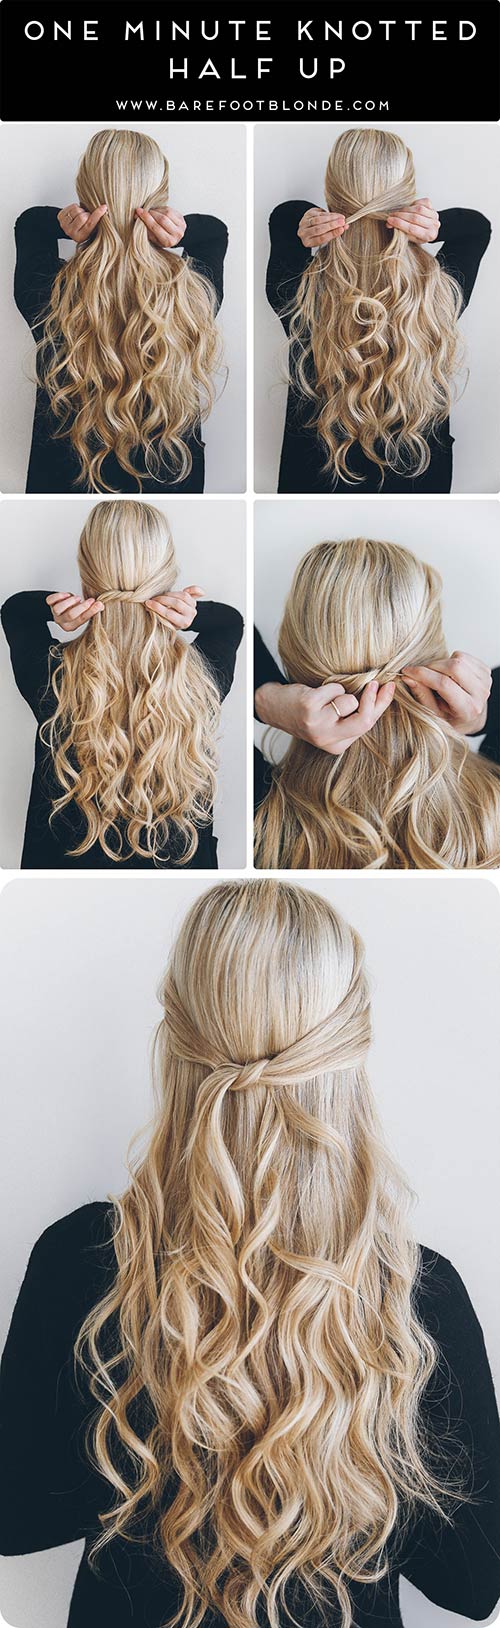 Knotted half-up hairstyle tutorial for girls with long hair